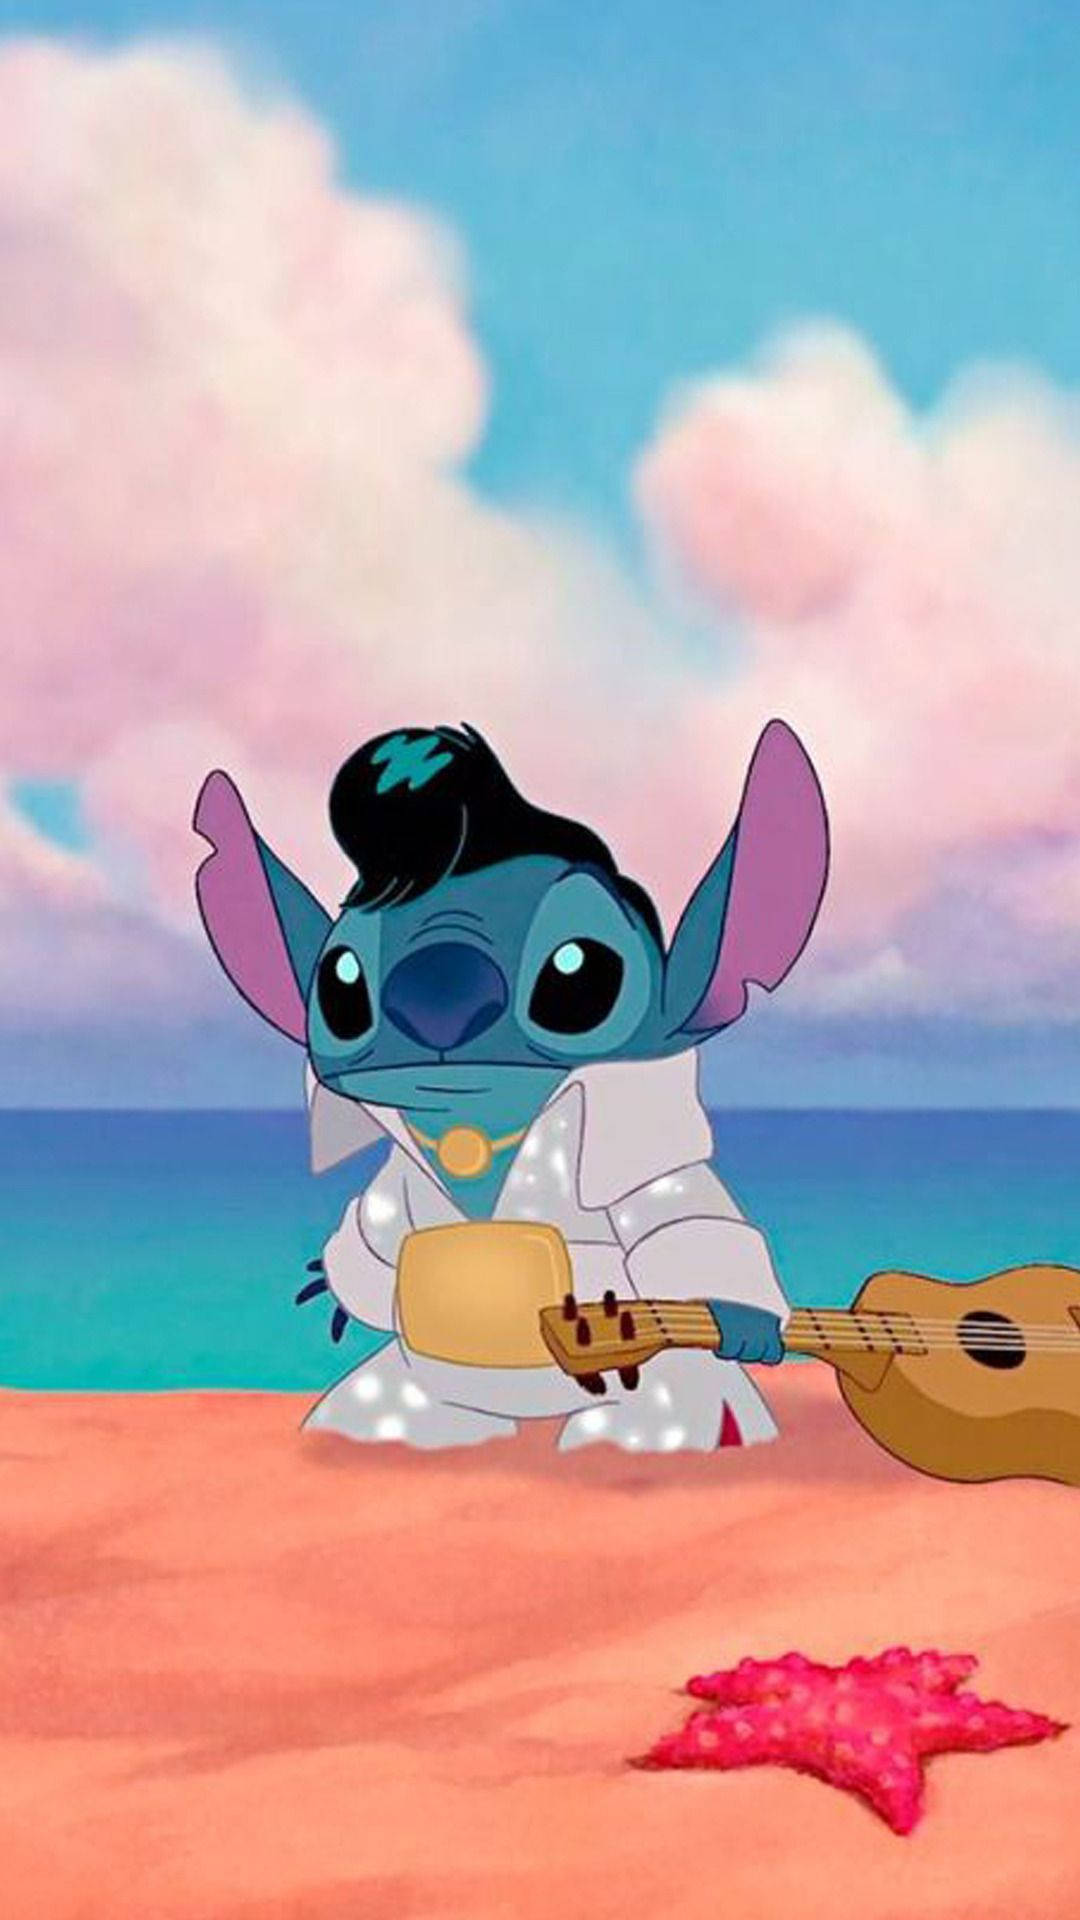 Cute Aesthetic Stitch Elvis Cosplay Background